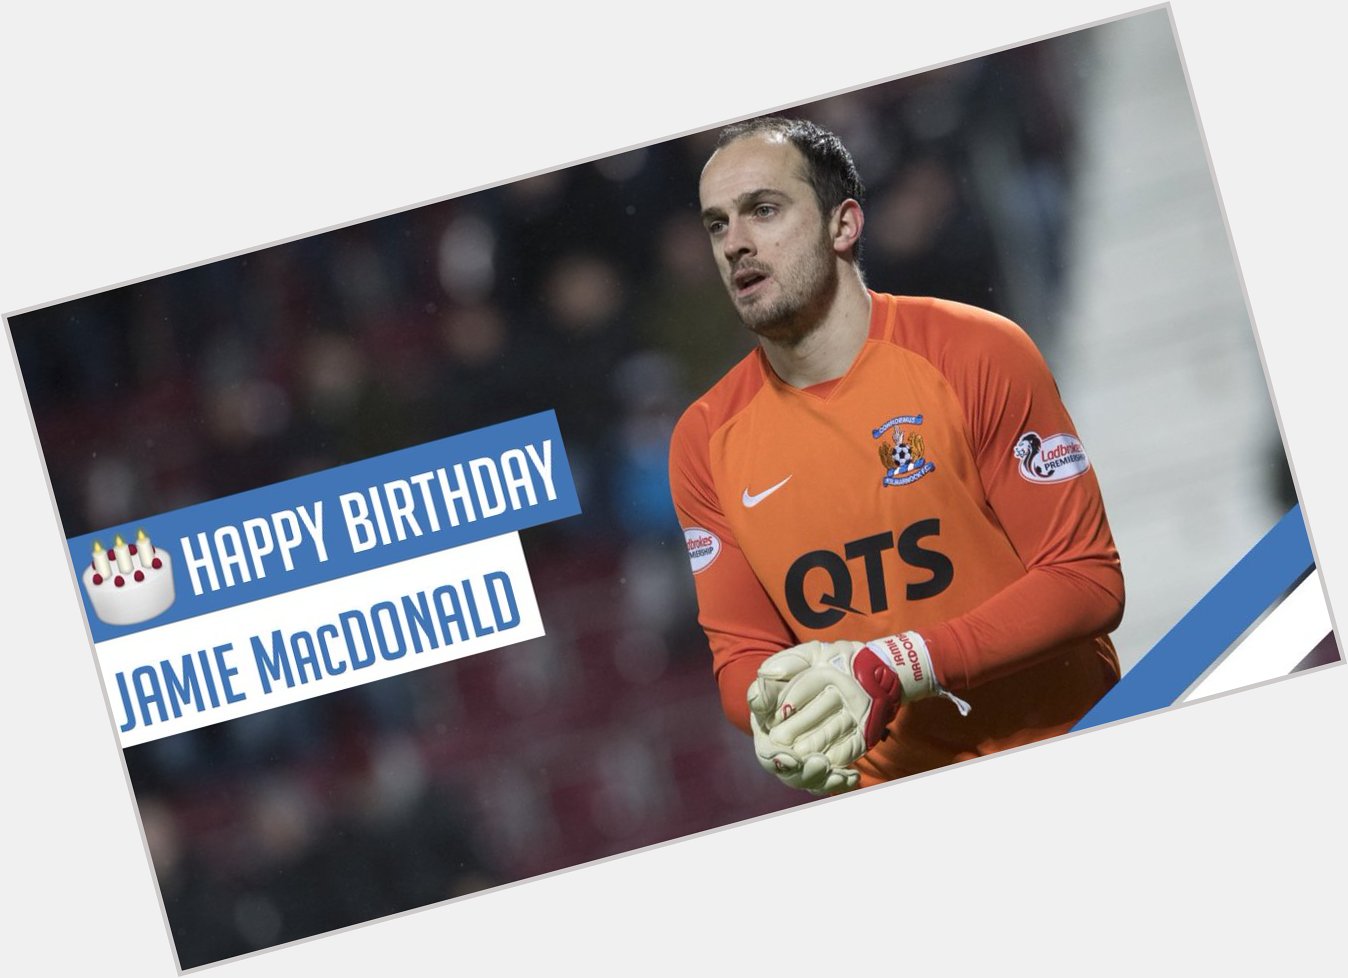    Happy Birthday to our number 1  Jamie MacDonald, who turns 32 today.

Do you have a favourite MacDonald moment? 